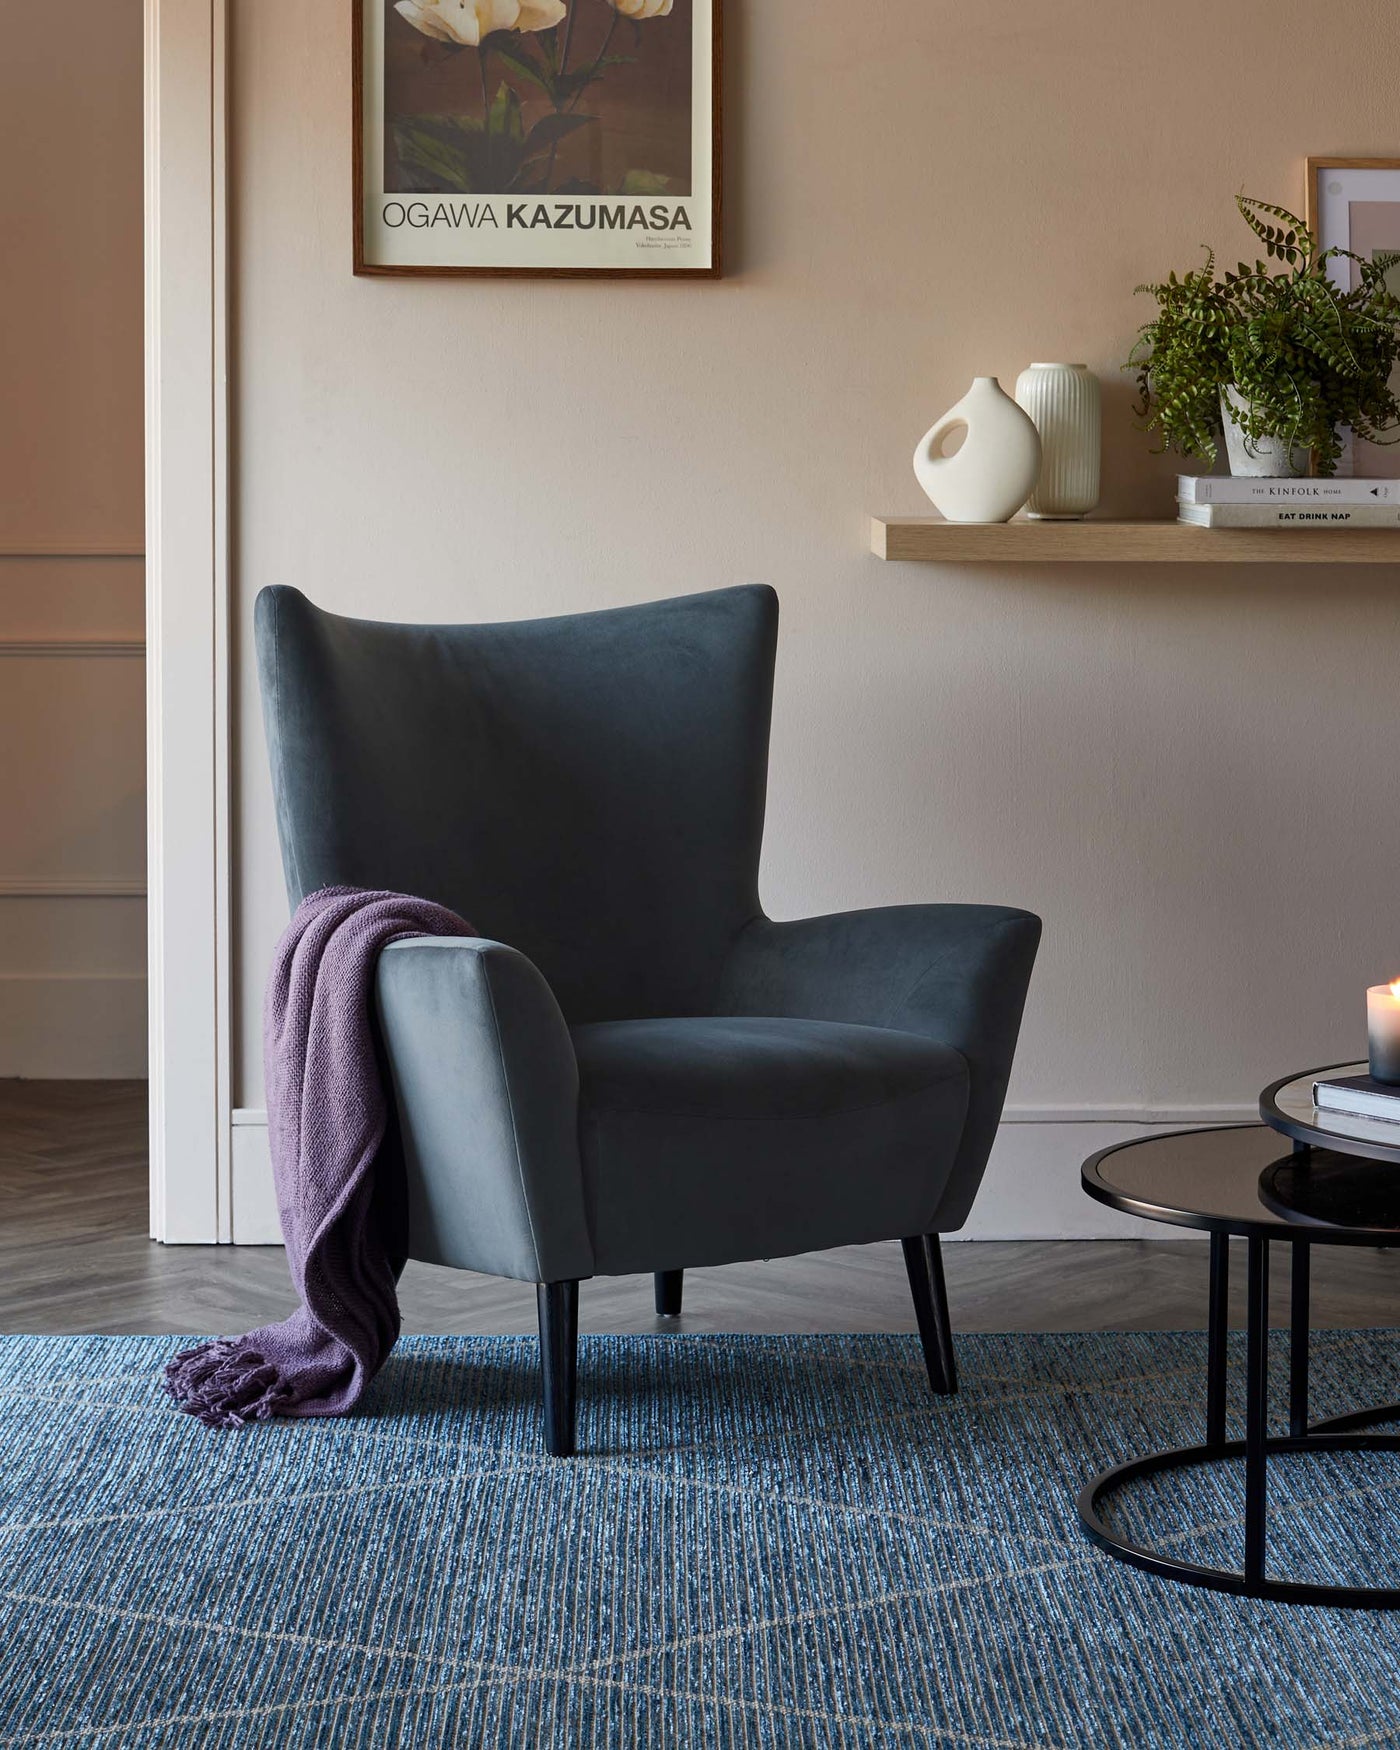 Elegant modern armchair with a high, curvilinear backrest and plush seating, upholstered in a smooth, dark grey fabric. It features sleek, tapered black legs. Next to it is a small, round, black metal side table with a glass top. A pale purple throw blanket is casually draped over one arm of the chair. The furniture sits on a textured blue area rug, adding a pop of colour to the neutral-toned room.